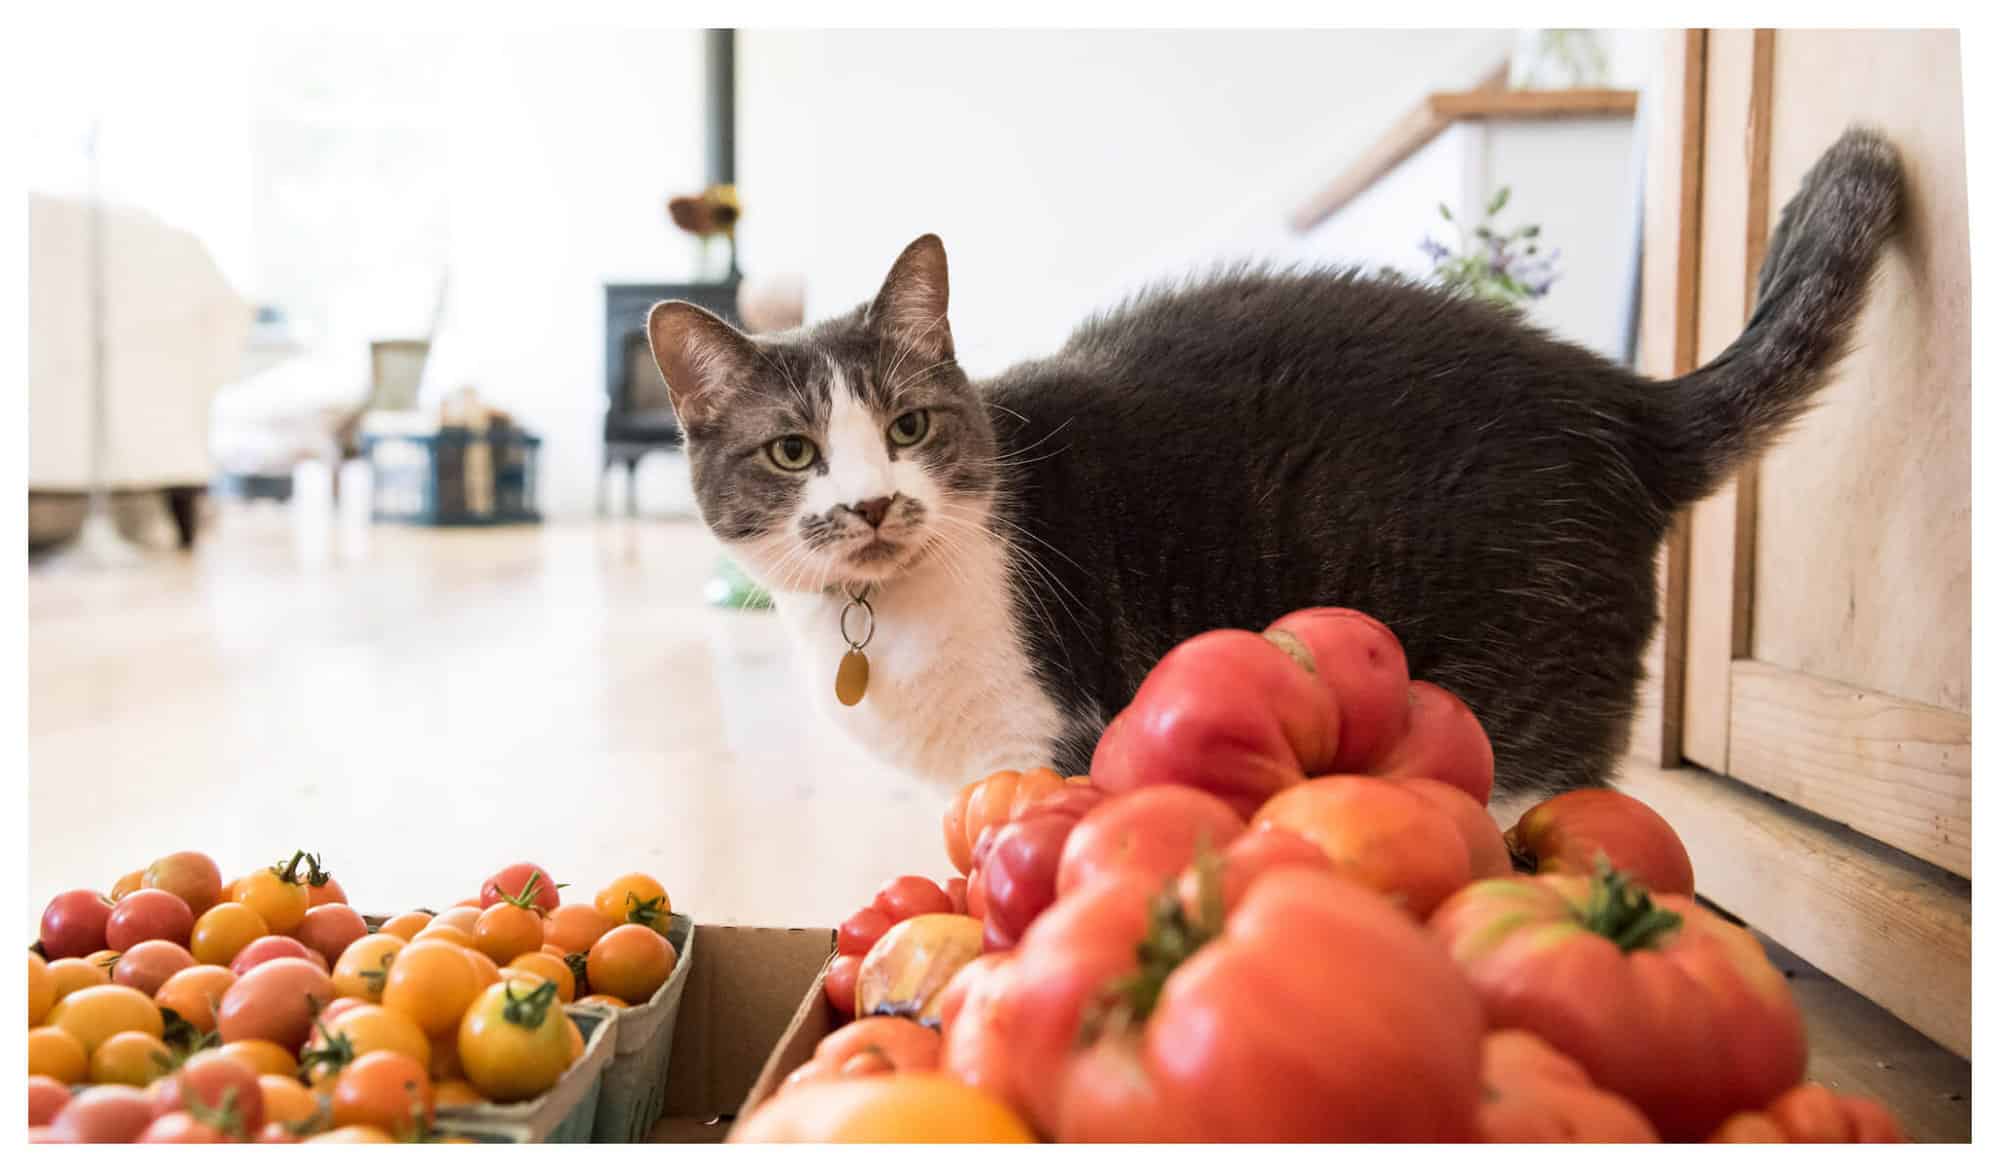 A cat with green eyes and gray and white fur with baskets full of orange tomatoes